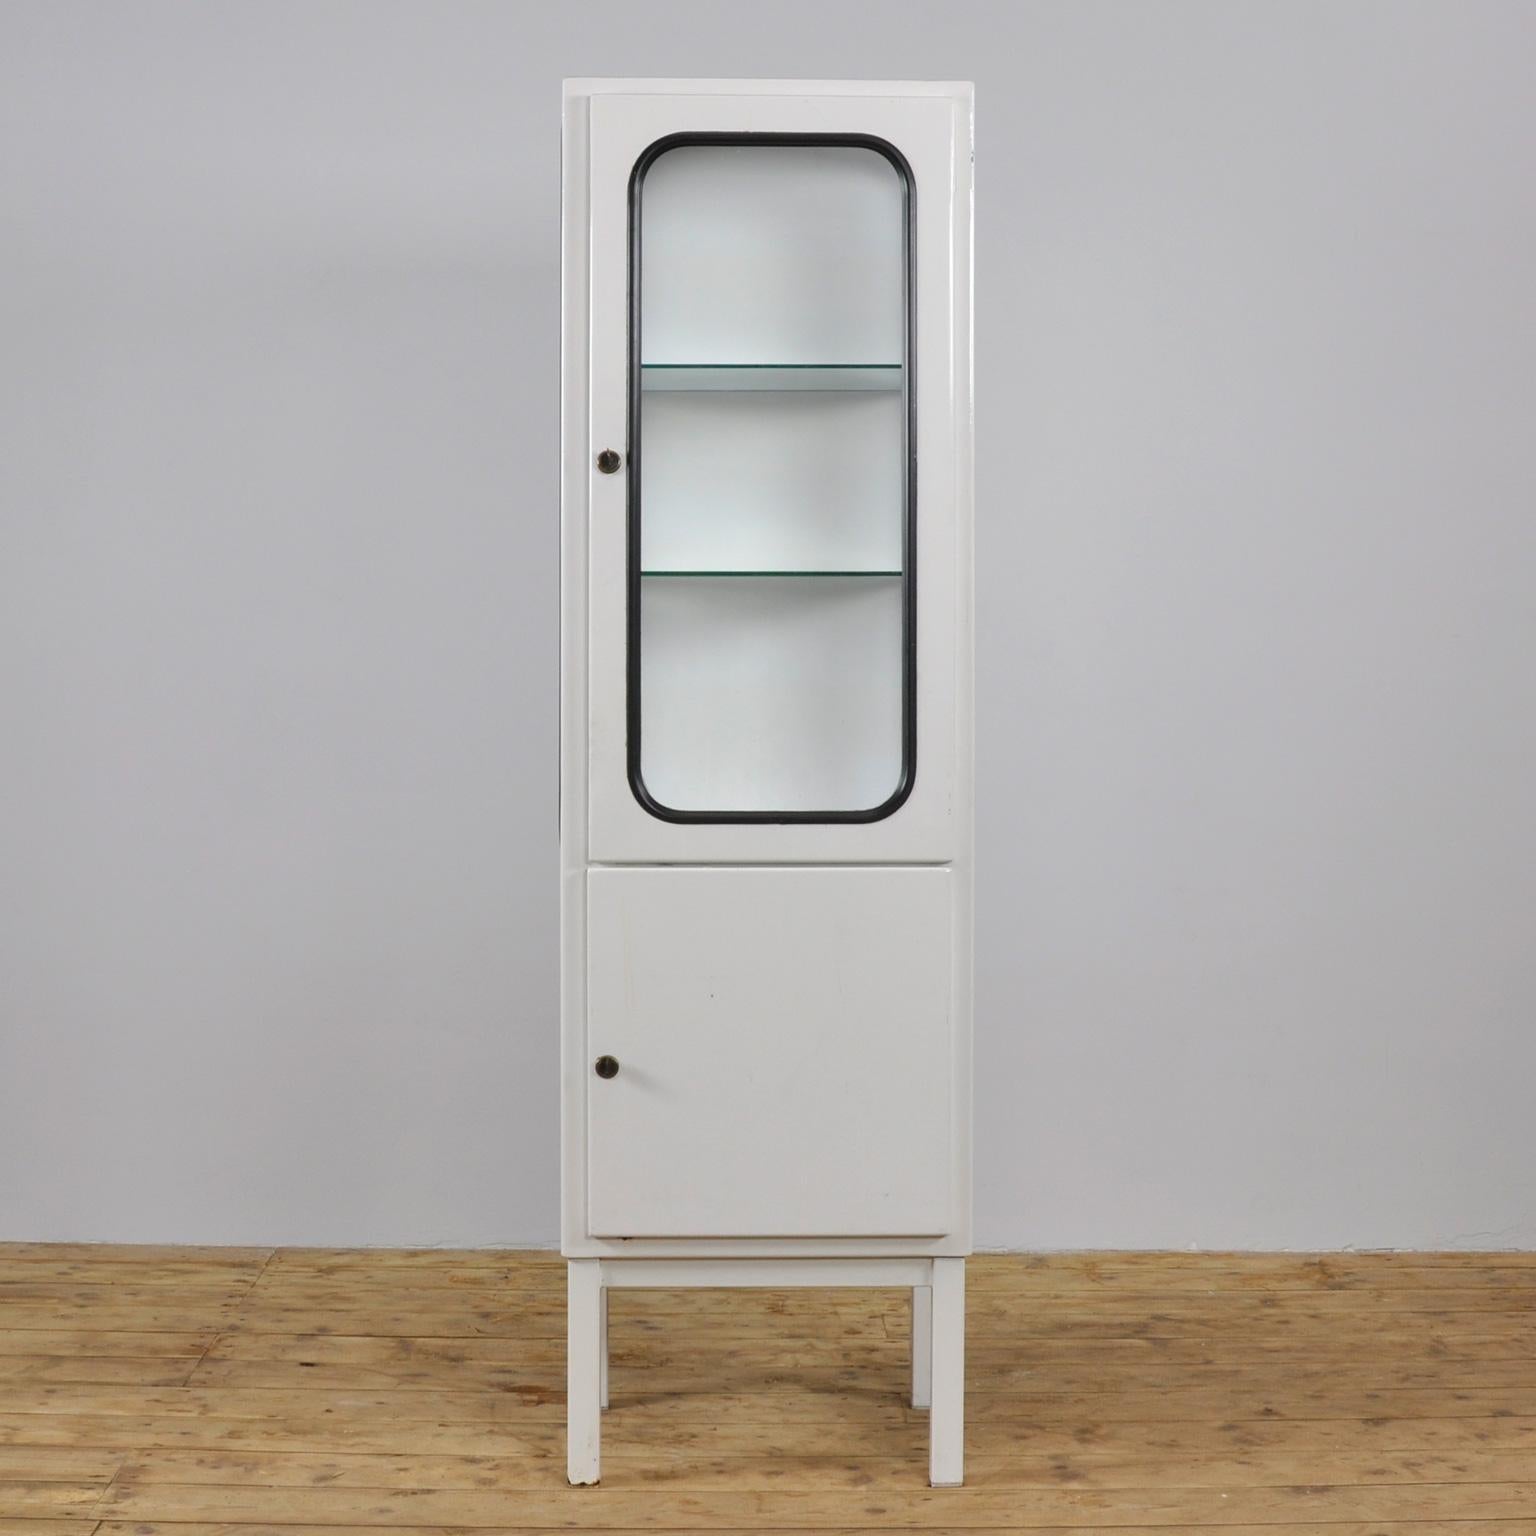 This medical cabinet was designed in the 1970s and produced in 1975, in Hungary. It is made from steel and glass, with the glass panes held in place by a black rubber strip. The cabinet features two adjustable glass shelves and functioning locks.